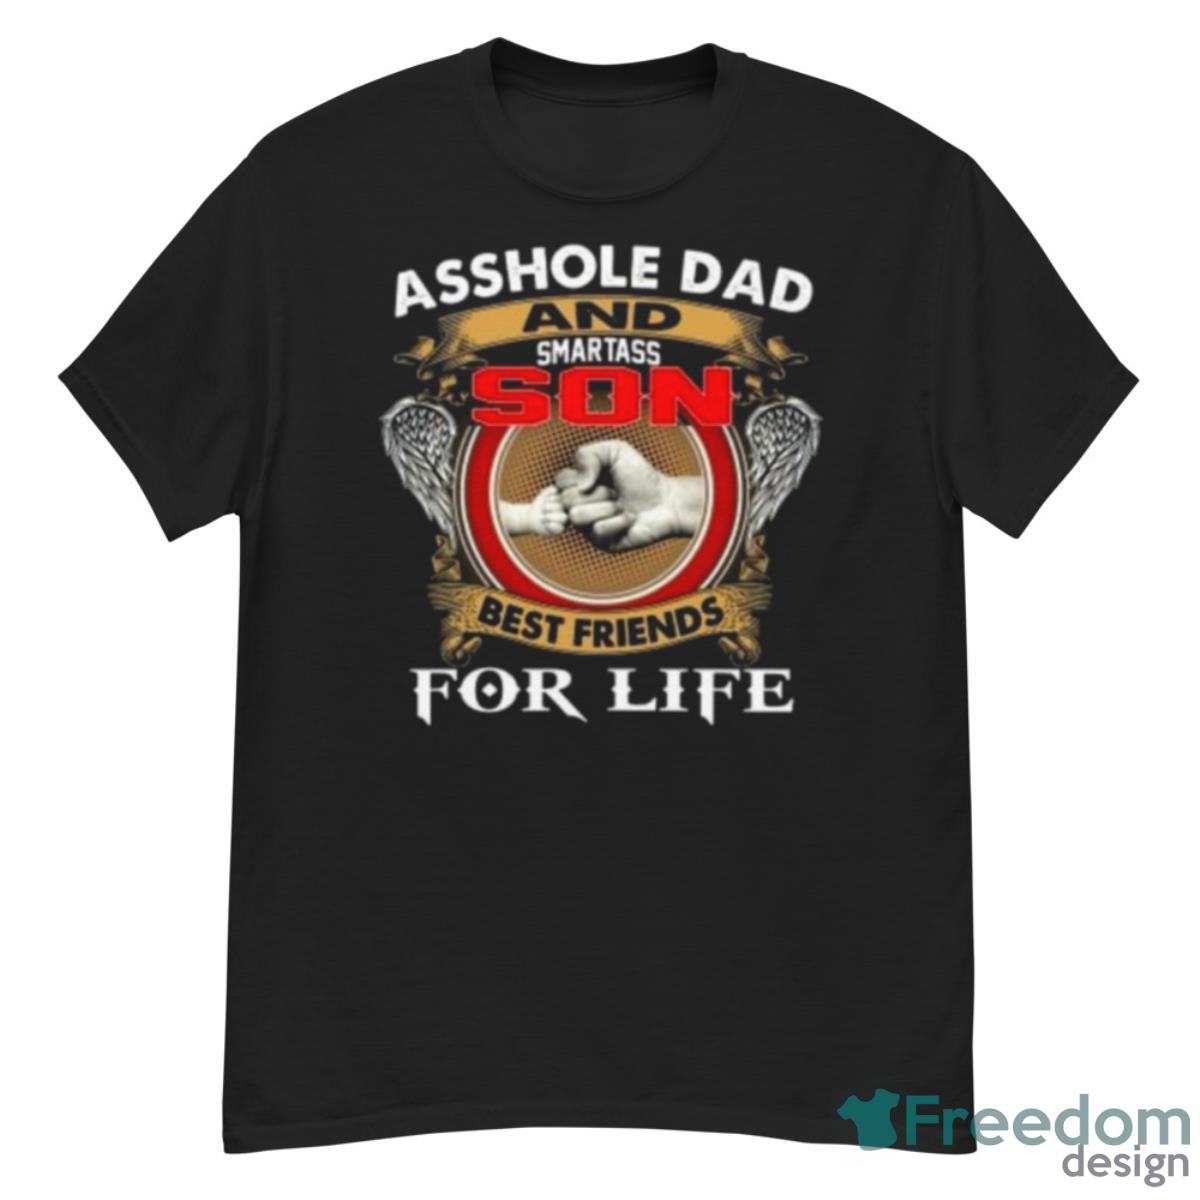 Asshle Dad And Smartass Son Best Friends For Life Father’s Day Shirt - G500 Men’s Classic T-Shirt